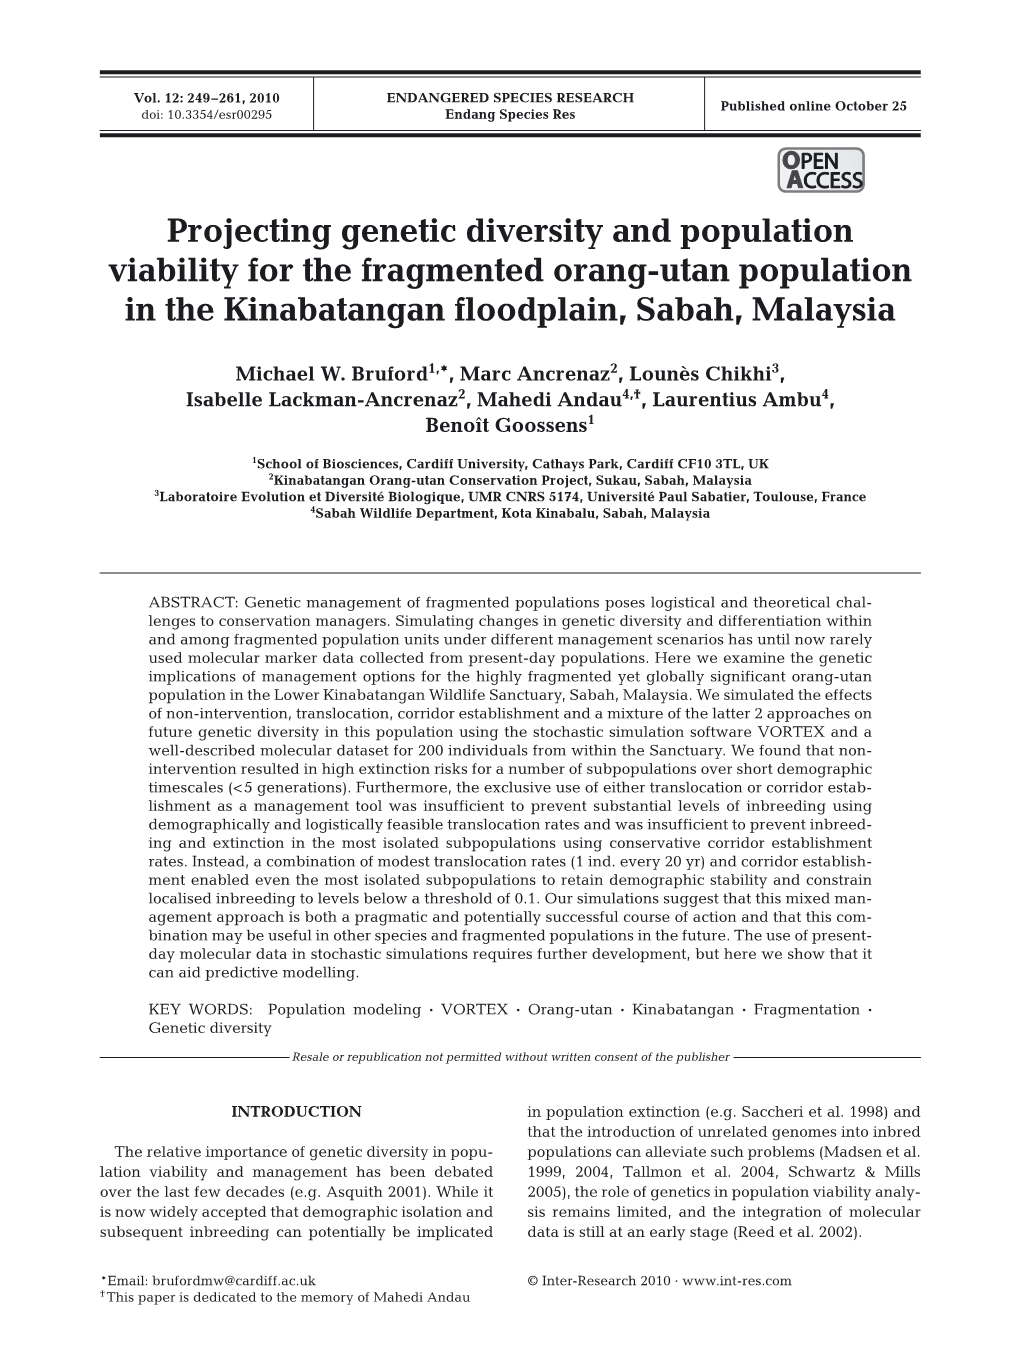 Projecting Genetic Diversity and Population Viability for the Fragmented Orang-Utan Population in the Kinabatangan Floodplain, Sabah, Malaysia